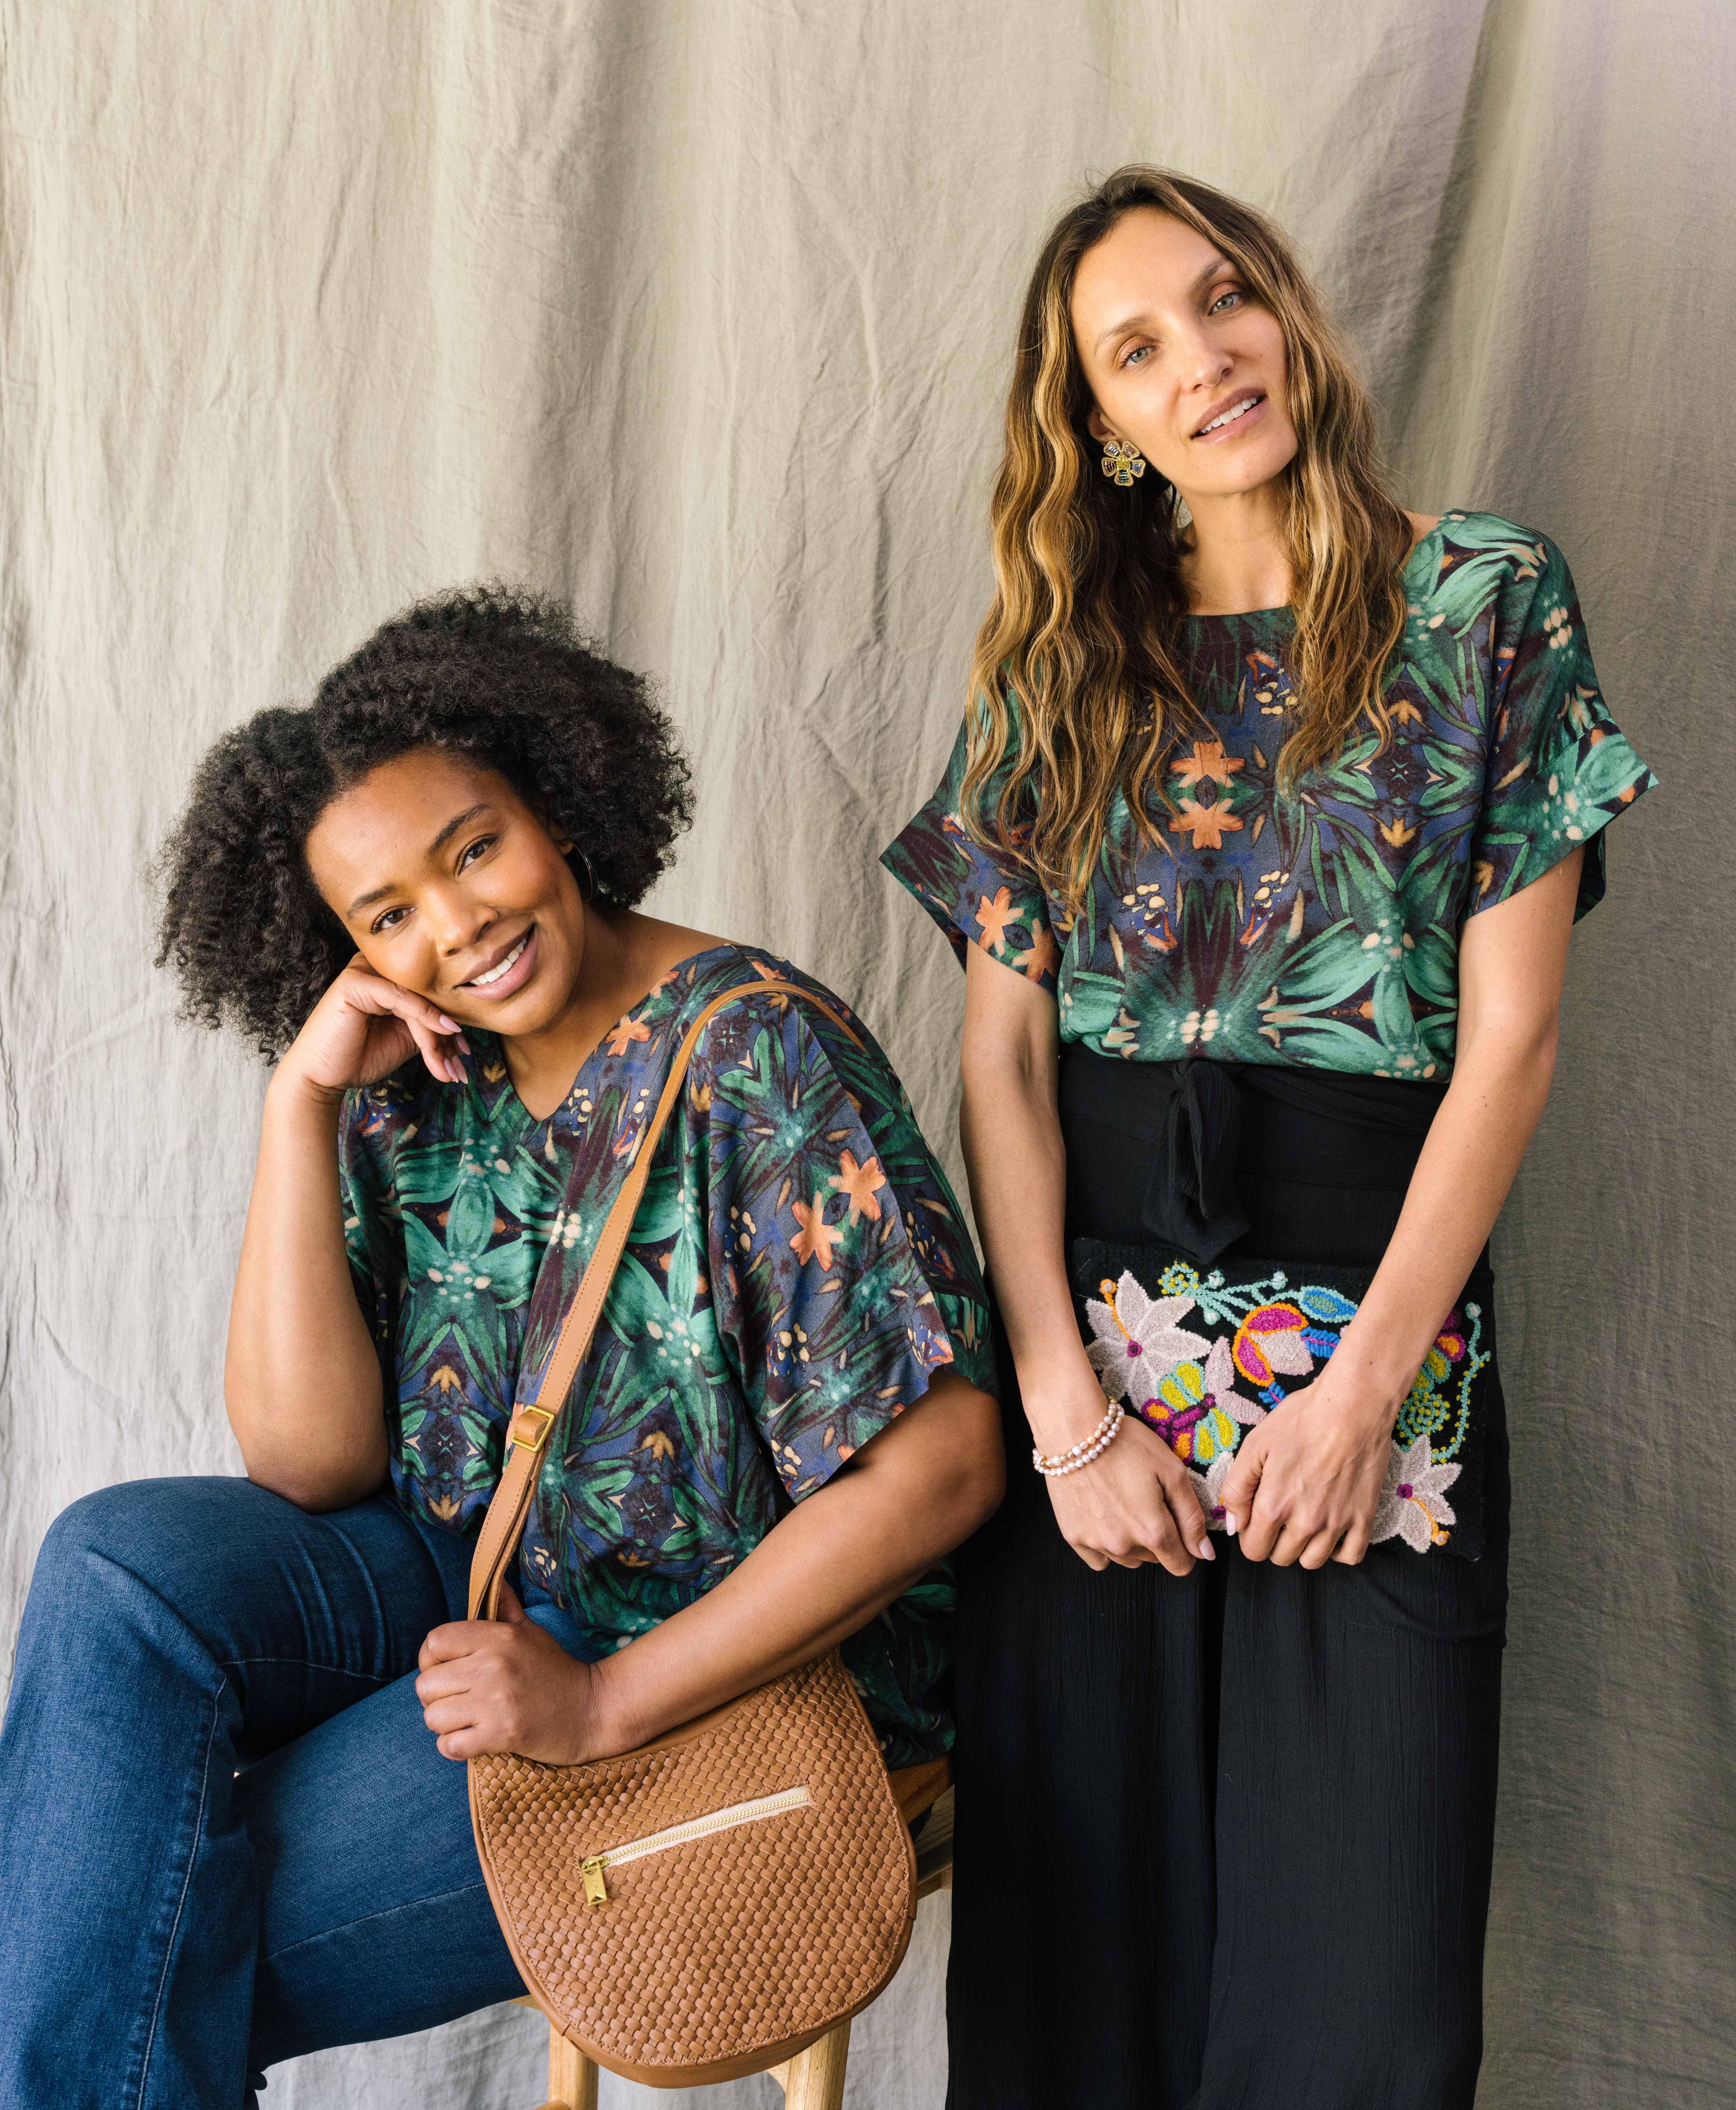 wo models wear the Crop Blouse styled two different ways. The top is short-sleeved and made of flowy rayon fabric with a lush jungle-inspired print. The model on the left wears it with the v-neck facing the front. The model on the right wears it with the crew neck facing the front.